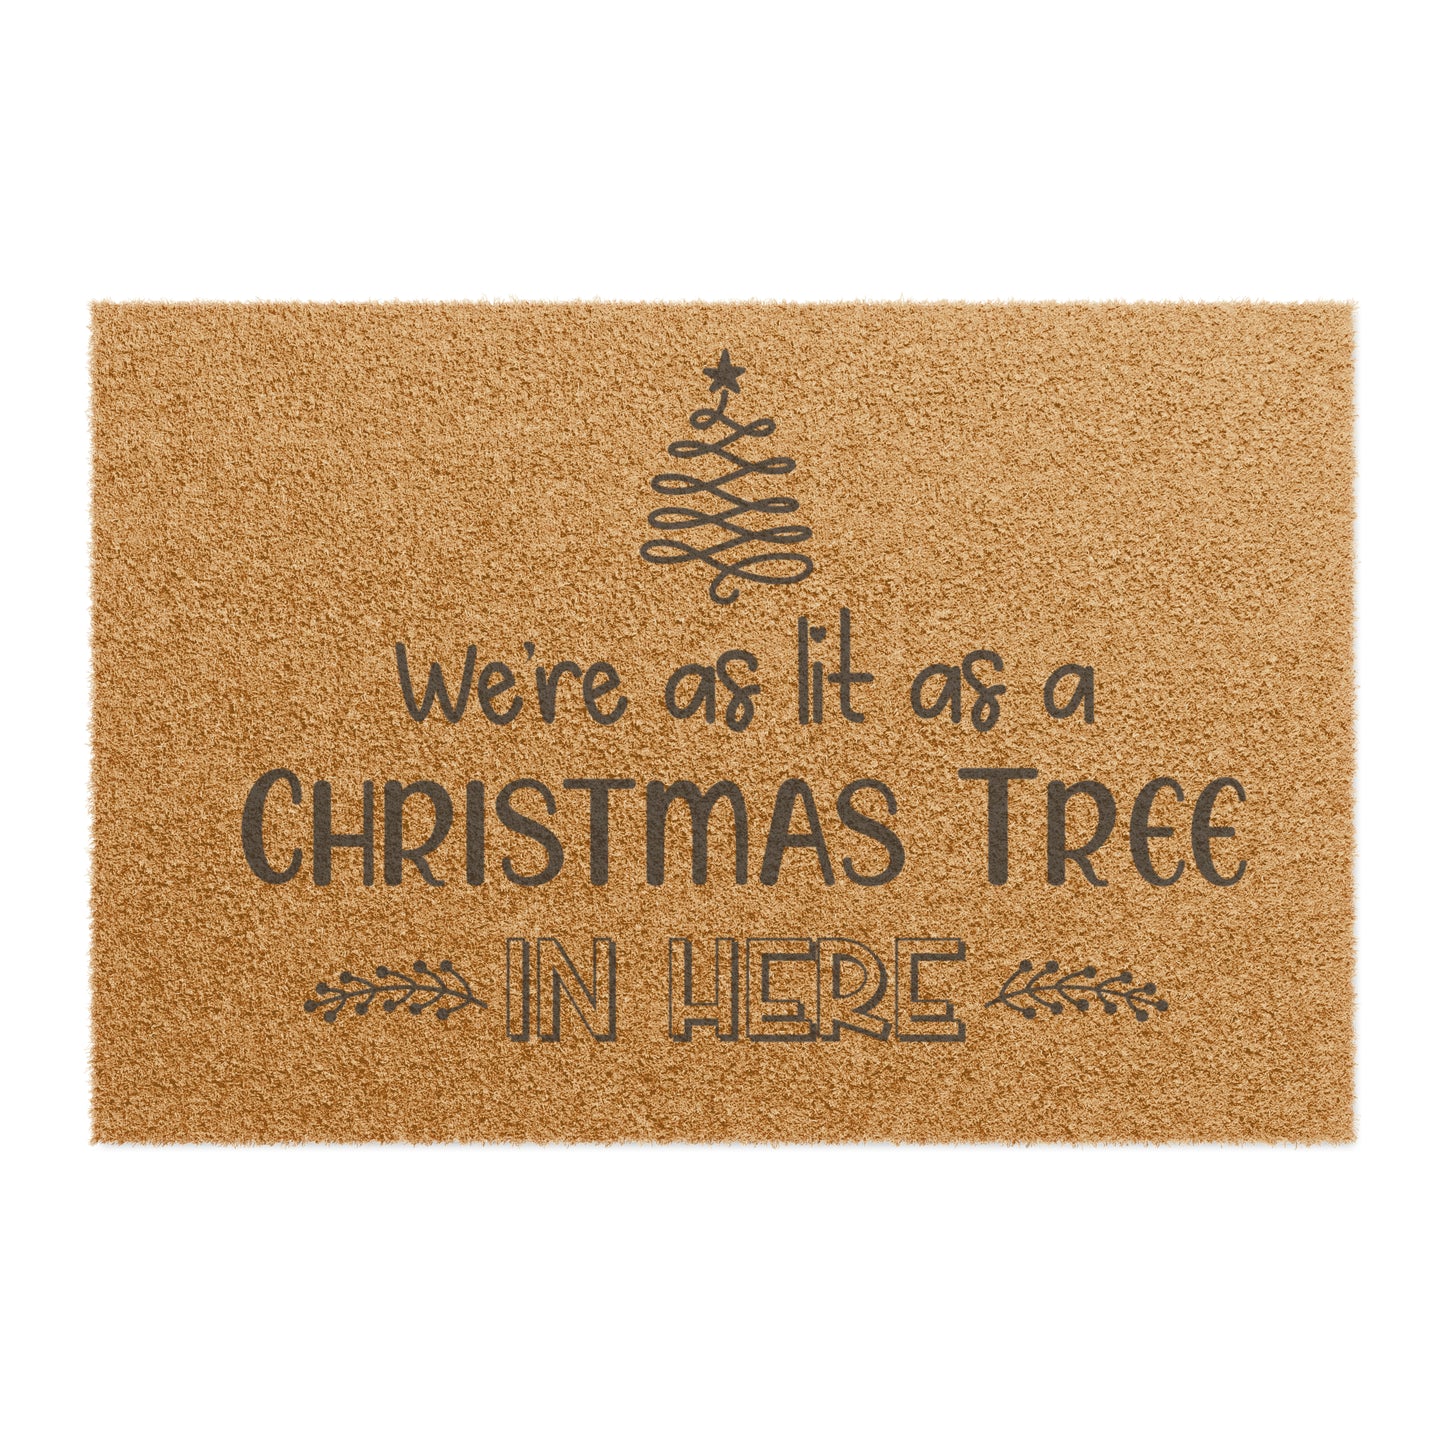 We're as lit as a Christmas Tree in here Doormat Funny Christmas Mat